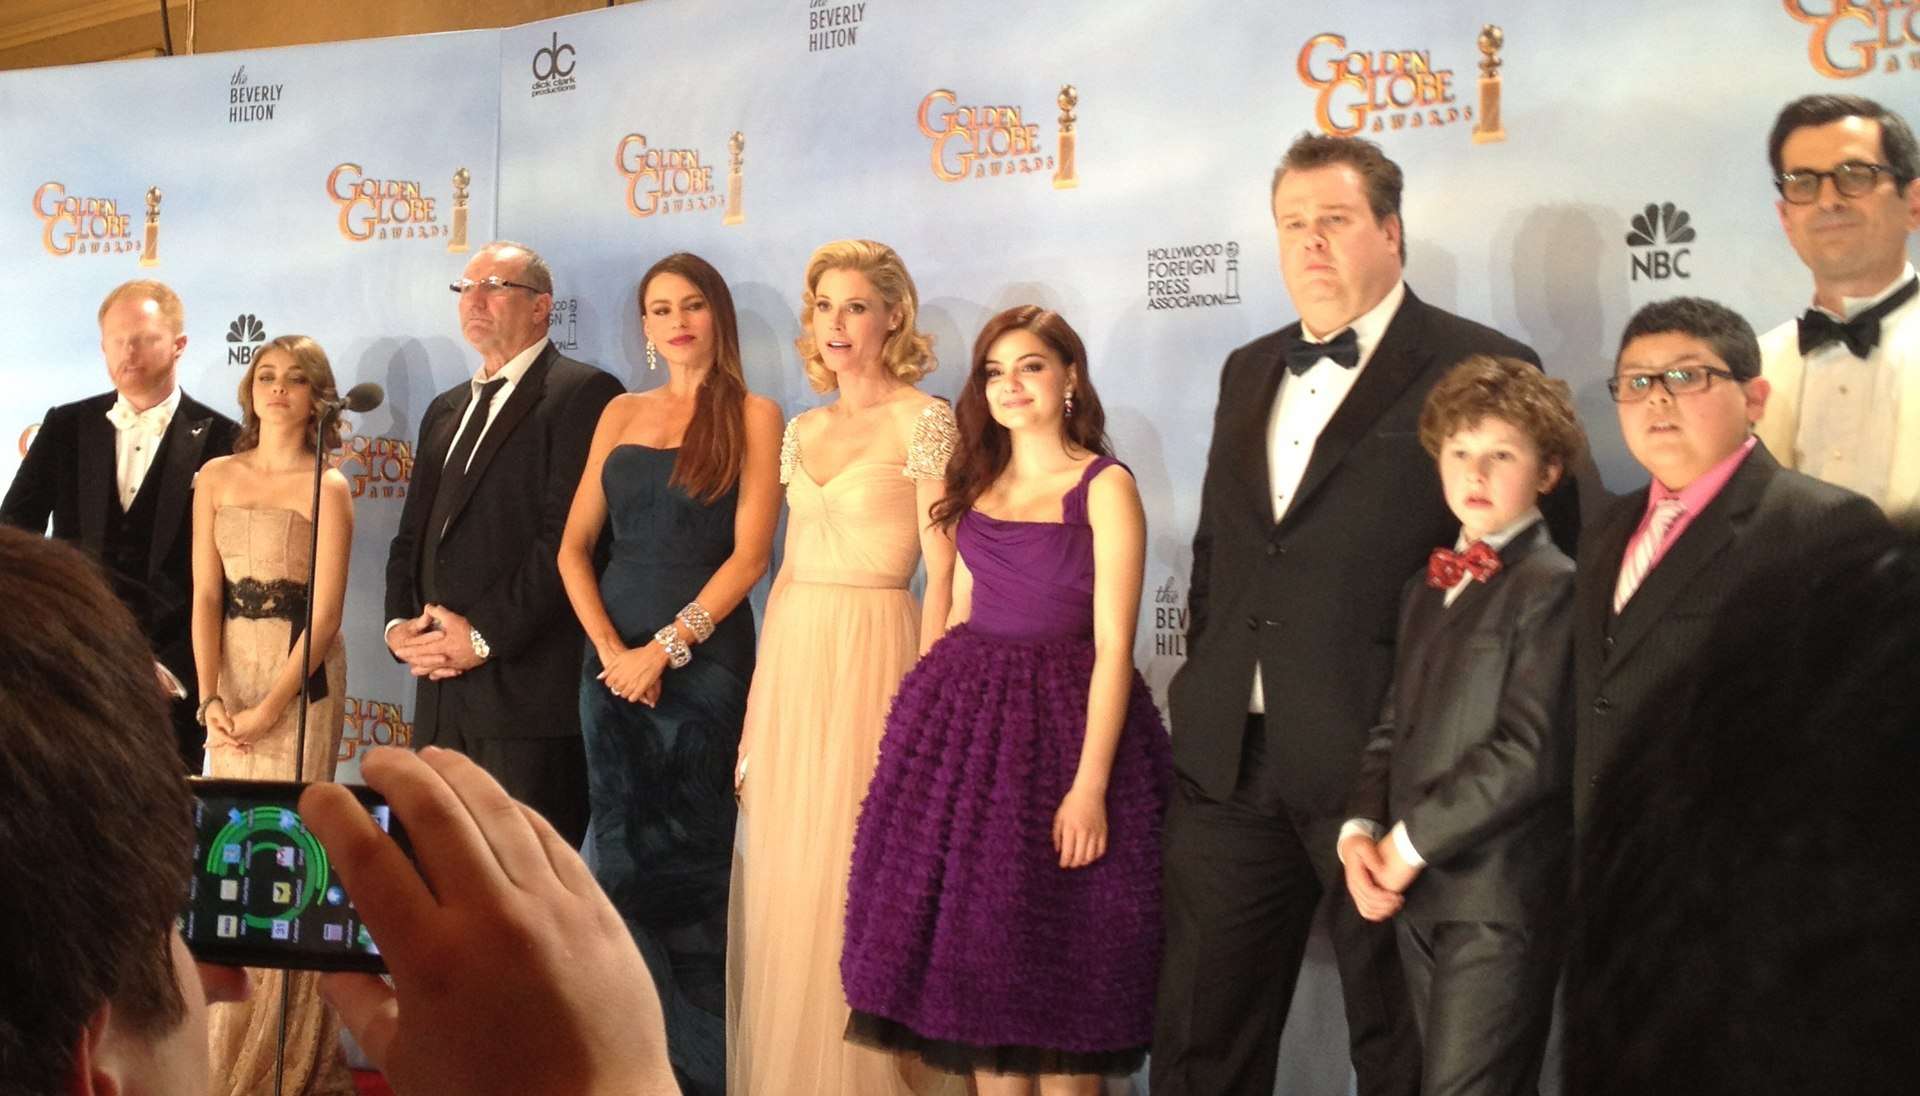 Gould (third from right) with the cast of Modern Family at the 69th Golden Globe Awards